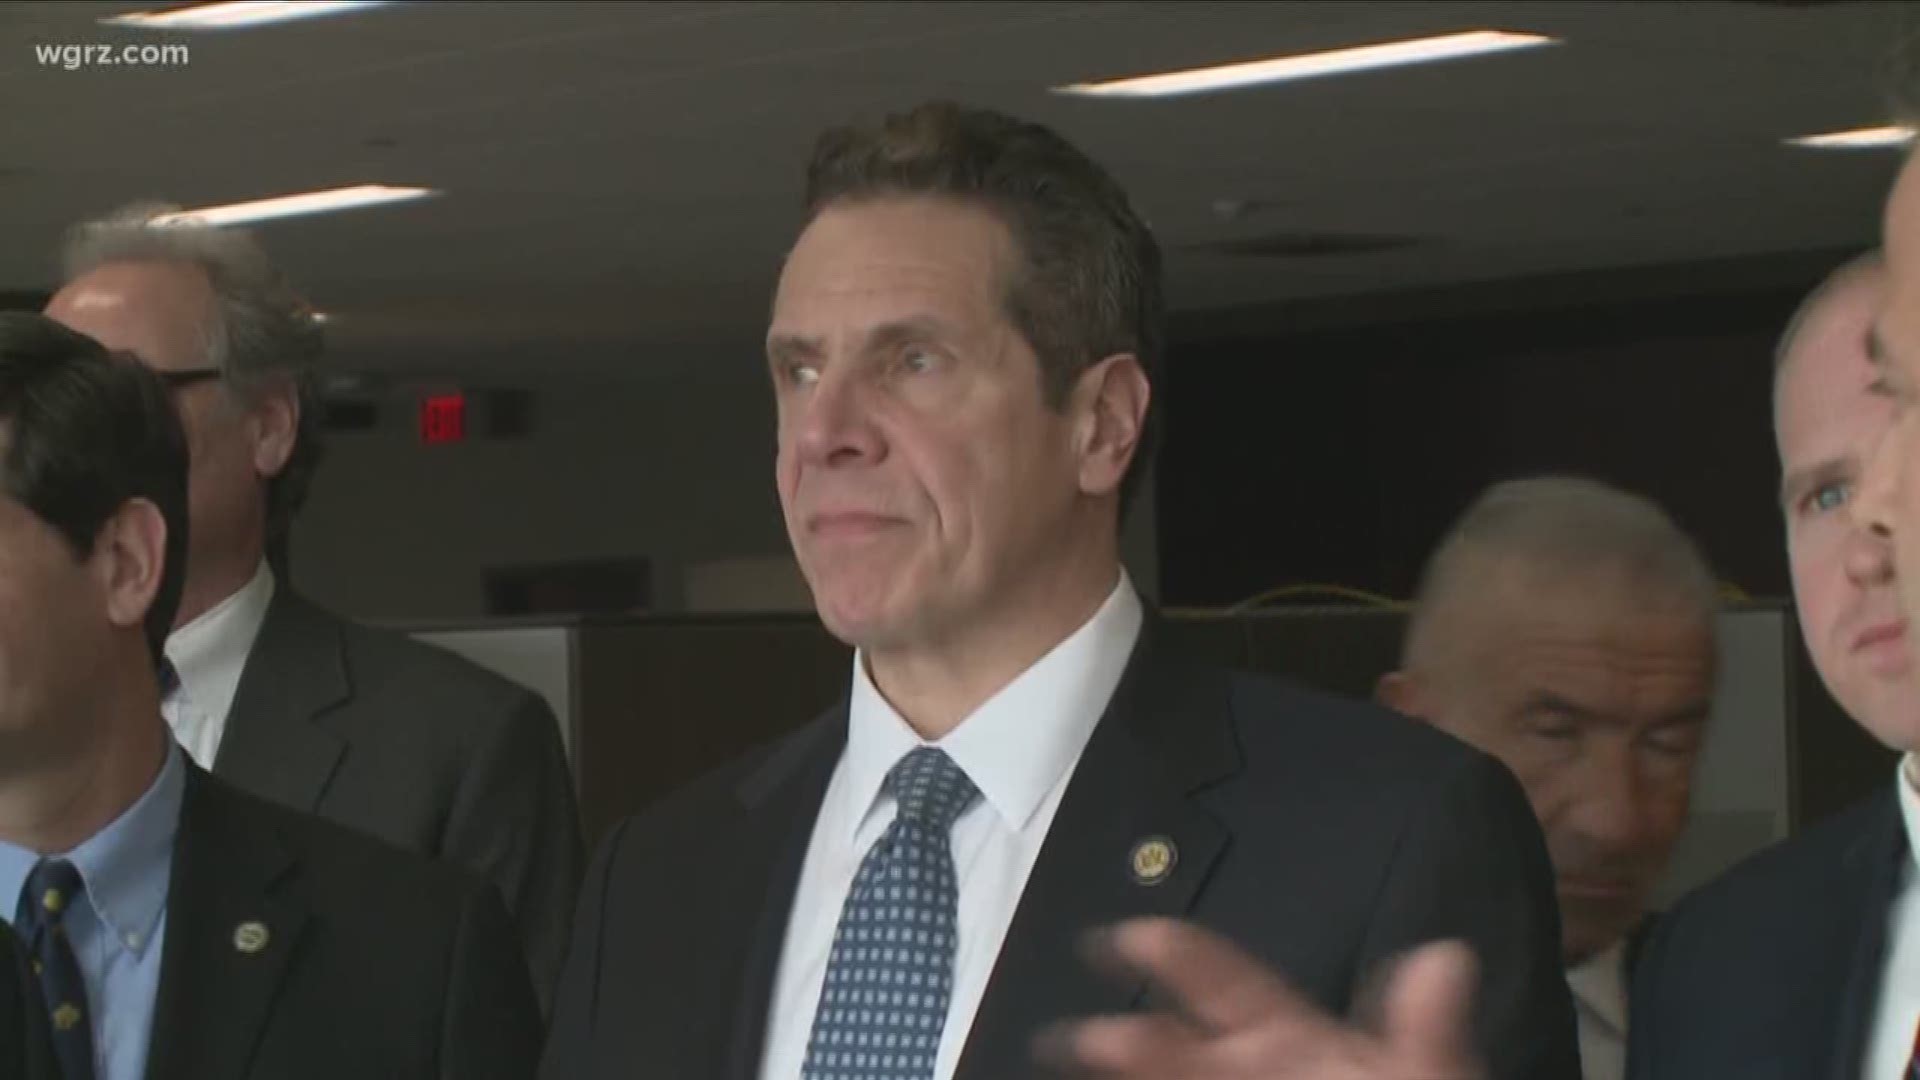 Another Cuomo controversy